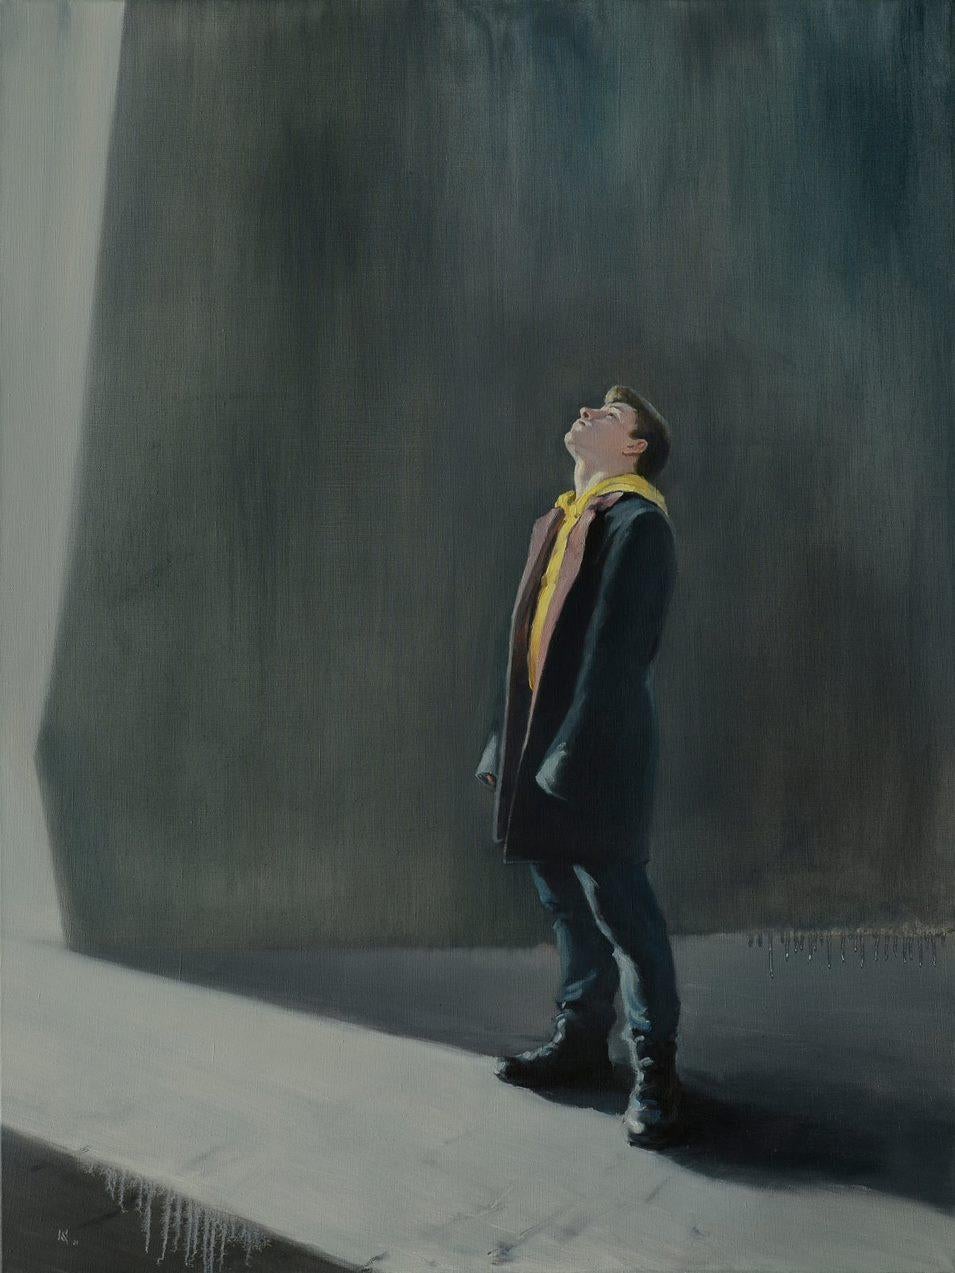 Oleg Kateryniuk Figurative Painting - Look Up, Figurative, Original oil Painting, Ready to Hang